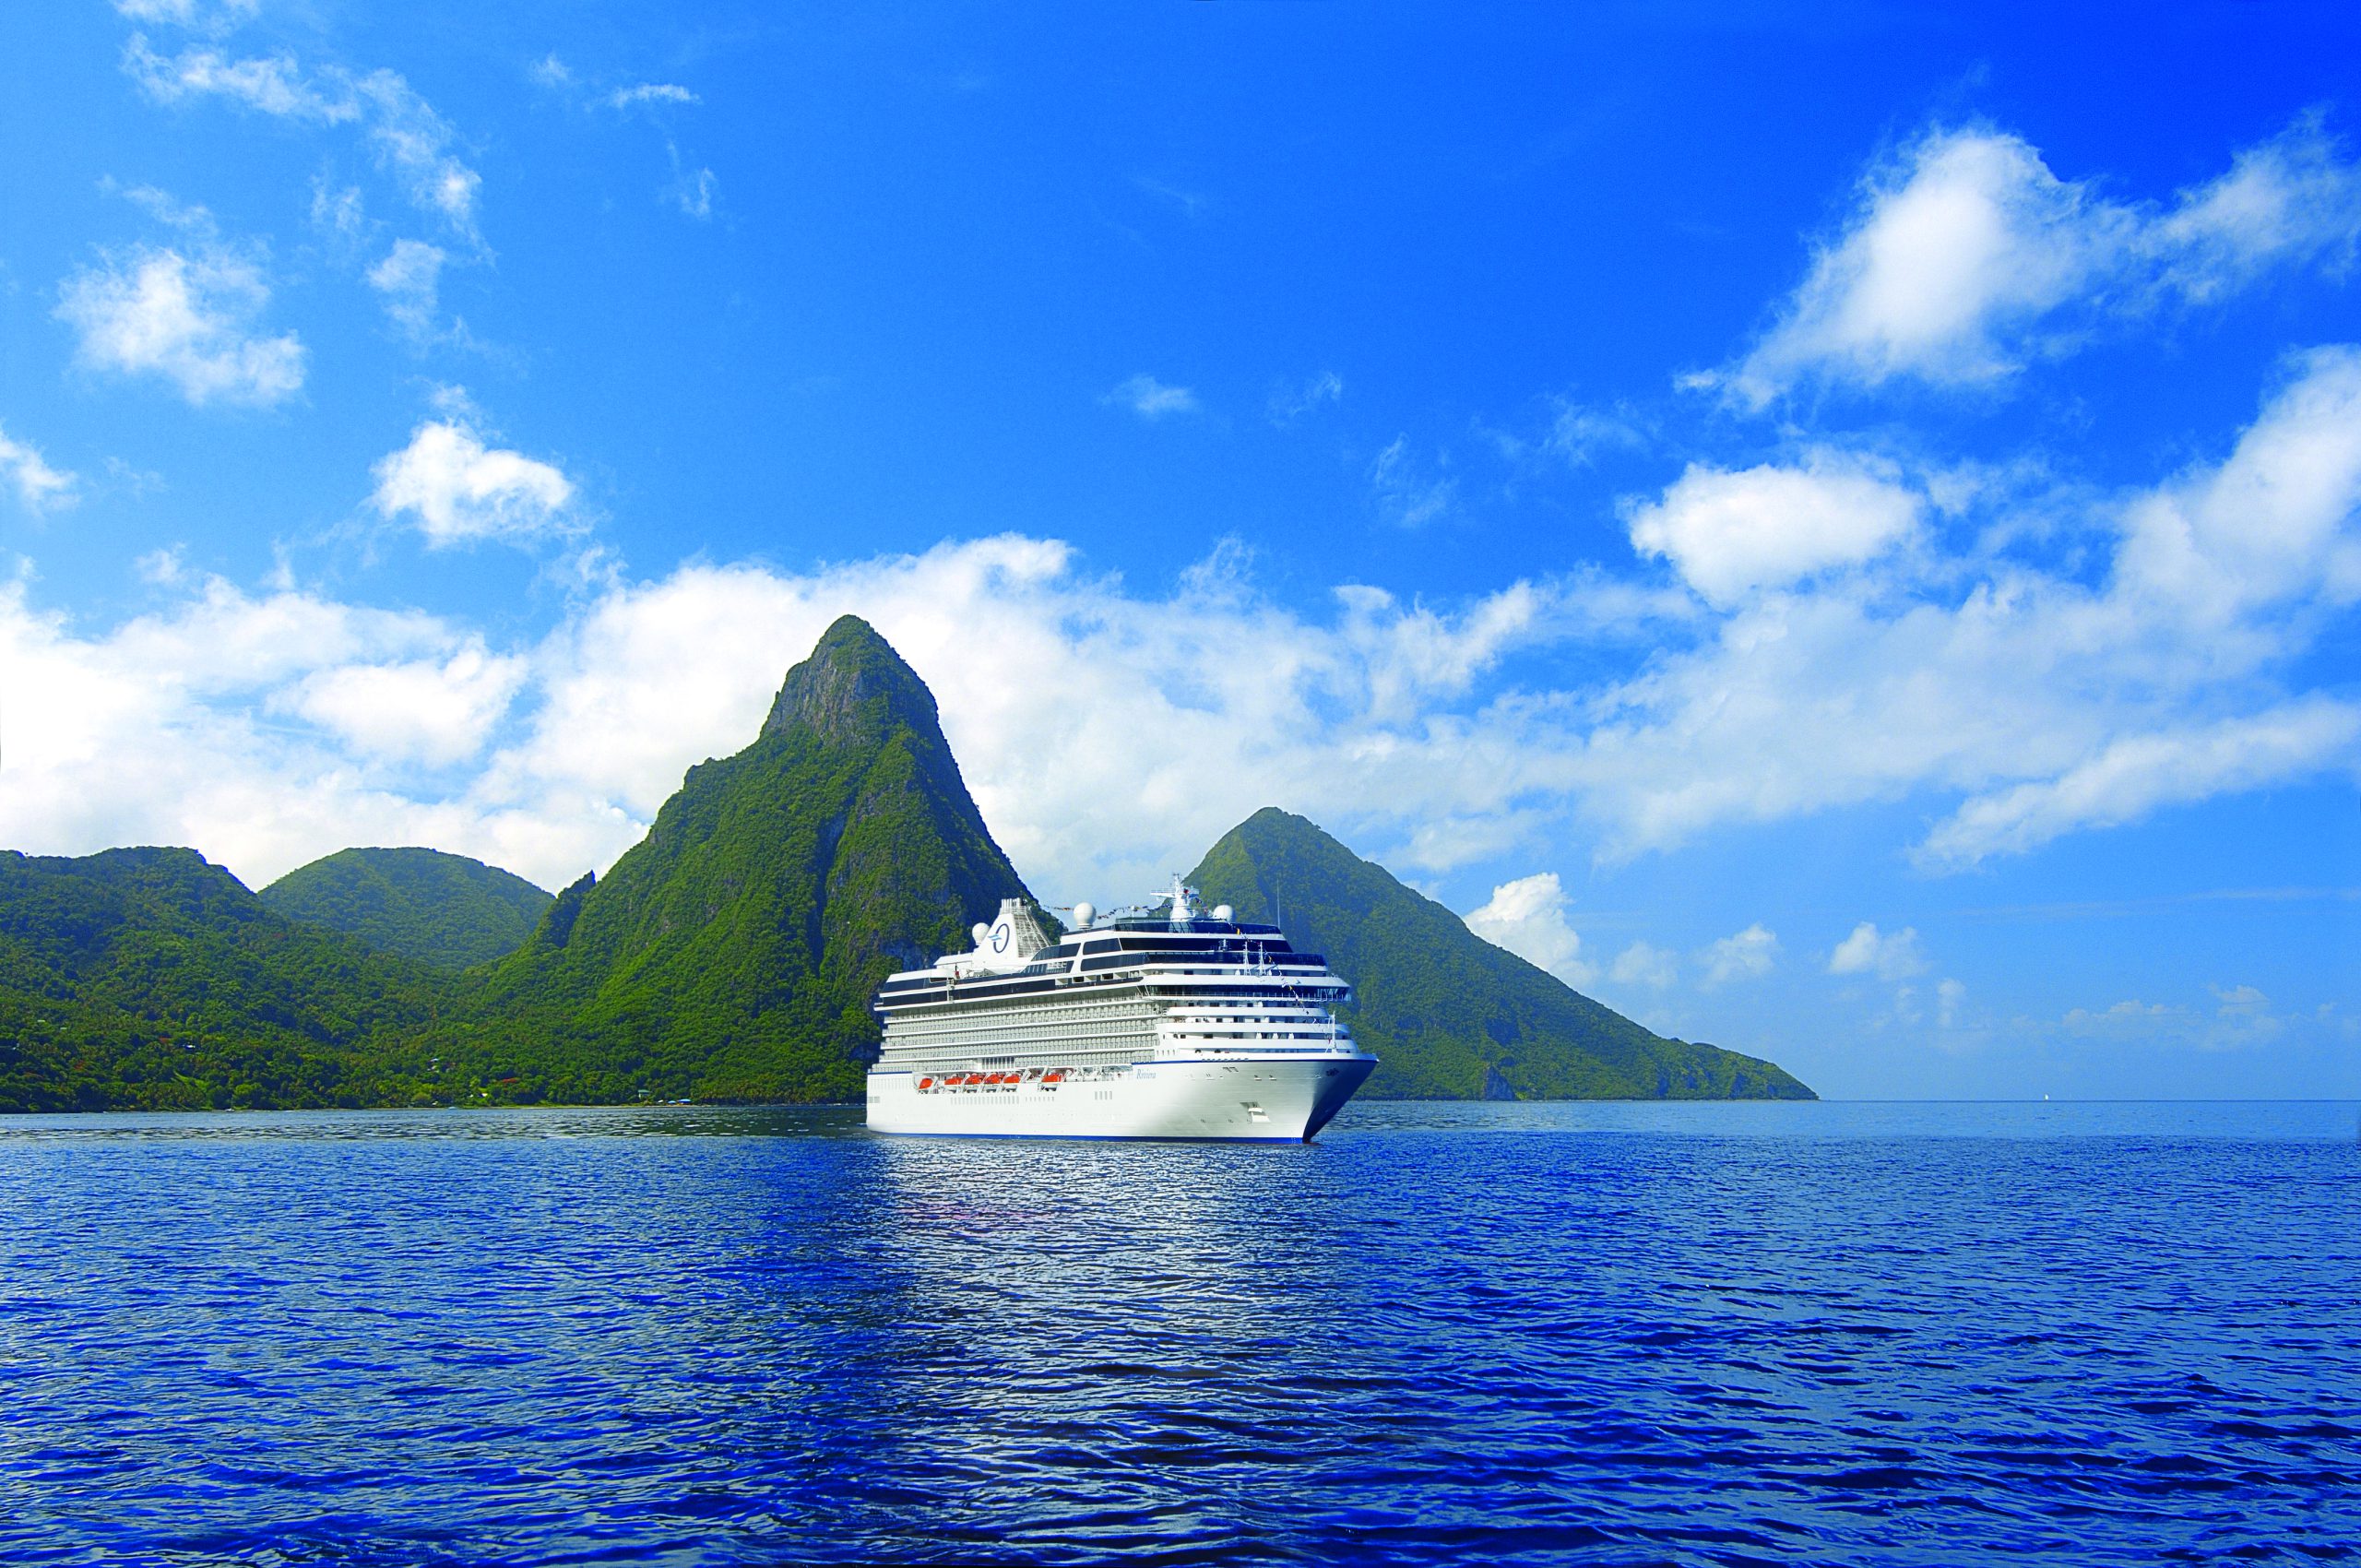 Oceania Cruises returns to Asia with voyages to Japan, Vietnam, South Korea and more